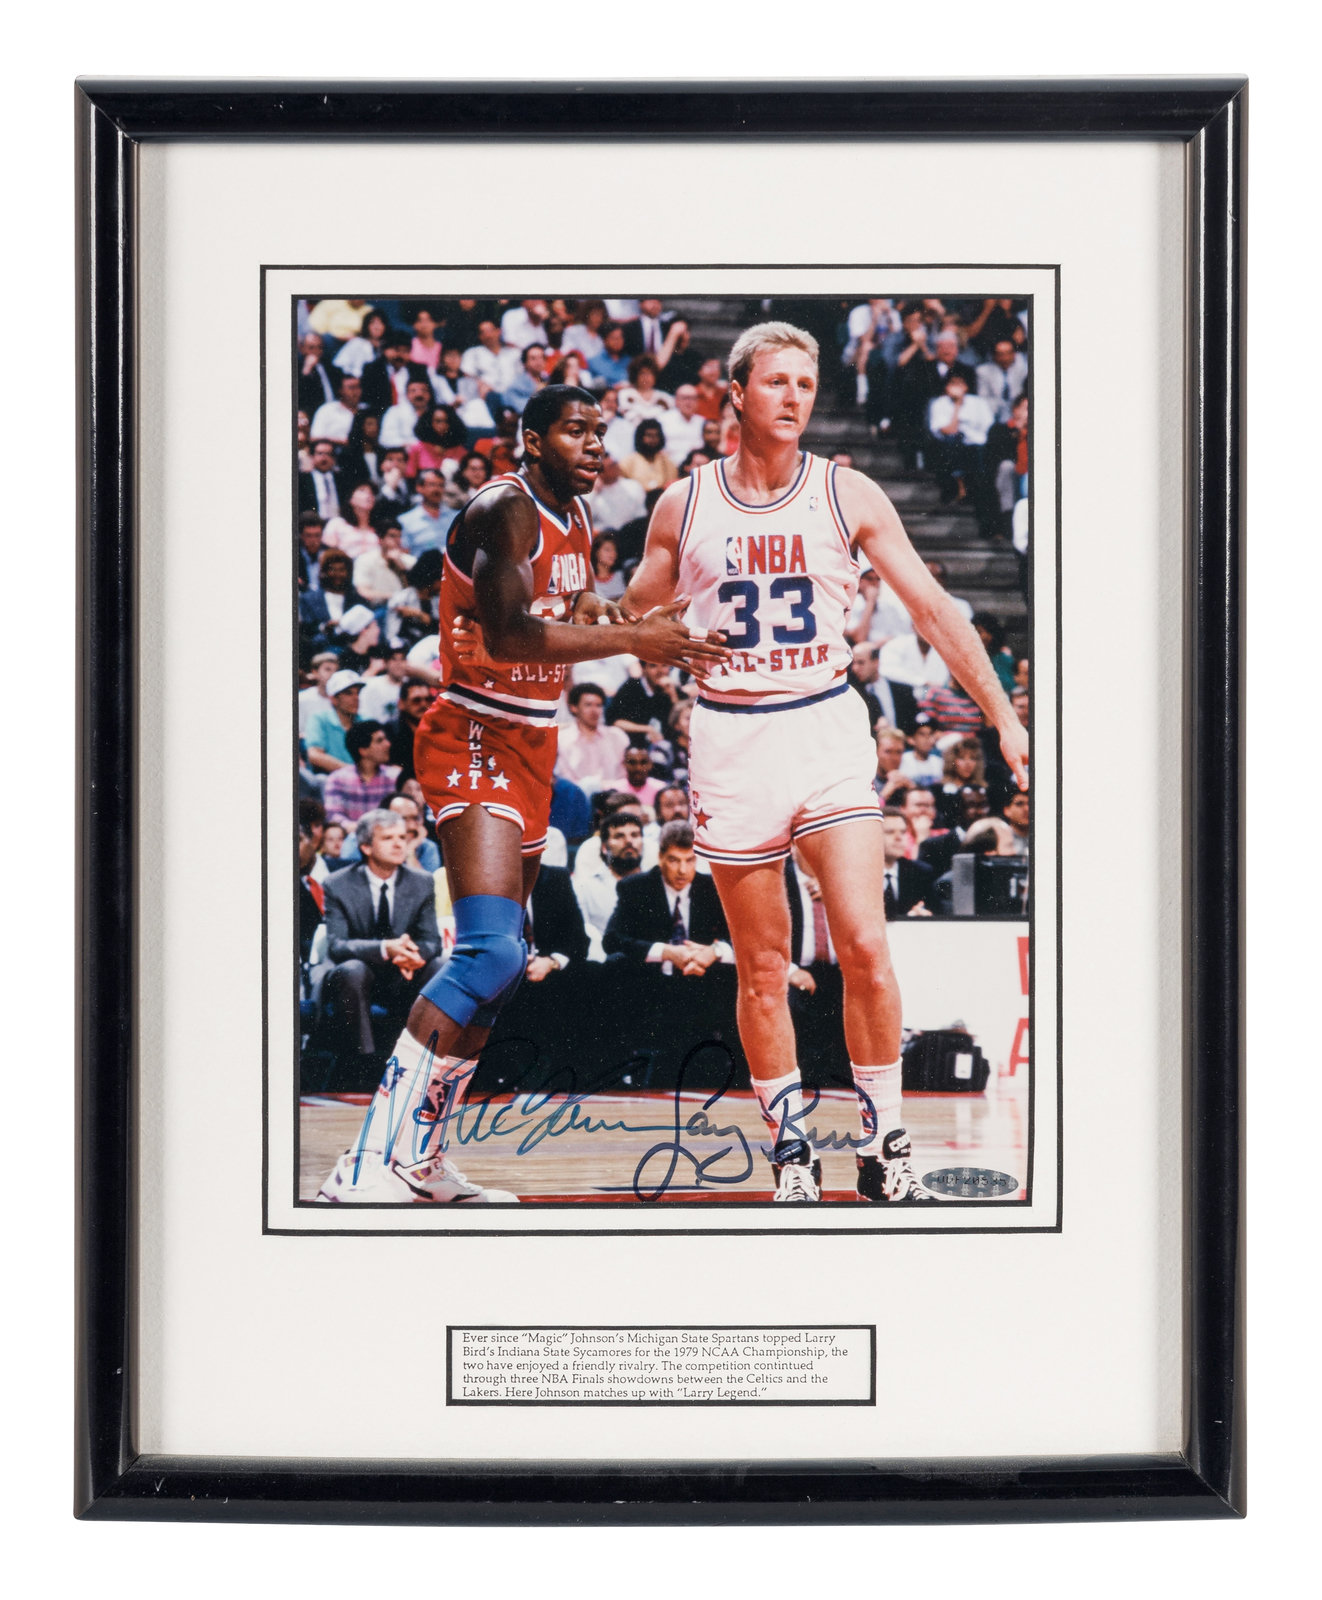 Sold at Auction: Magic Johnson & Larry Bird Signed Basketball with